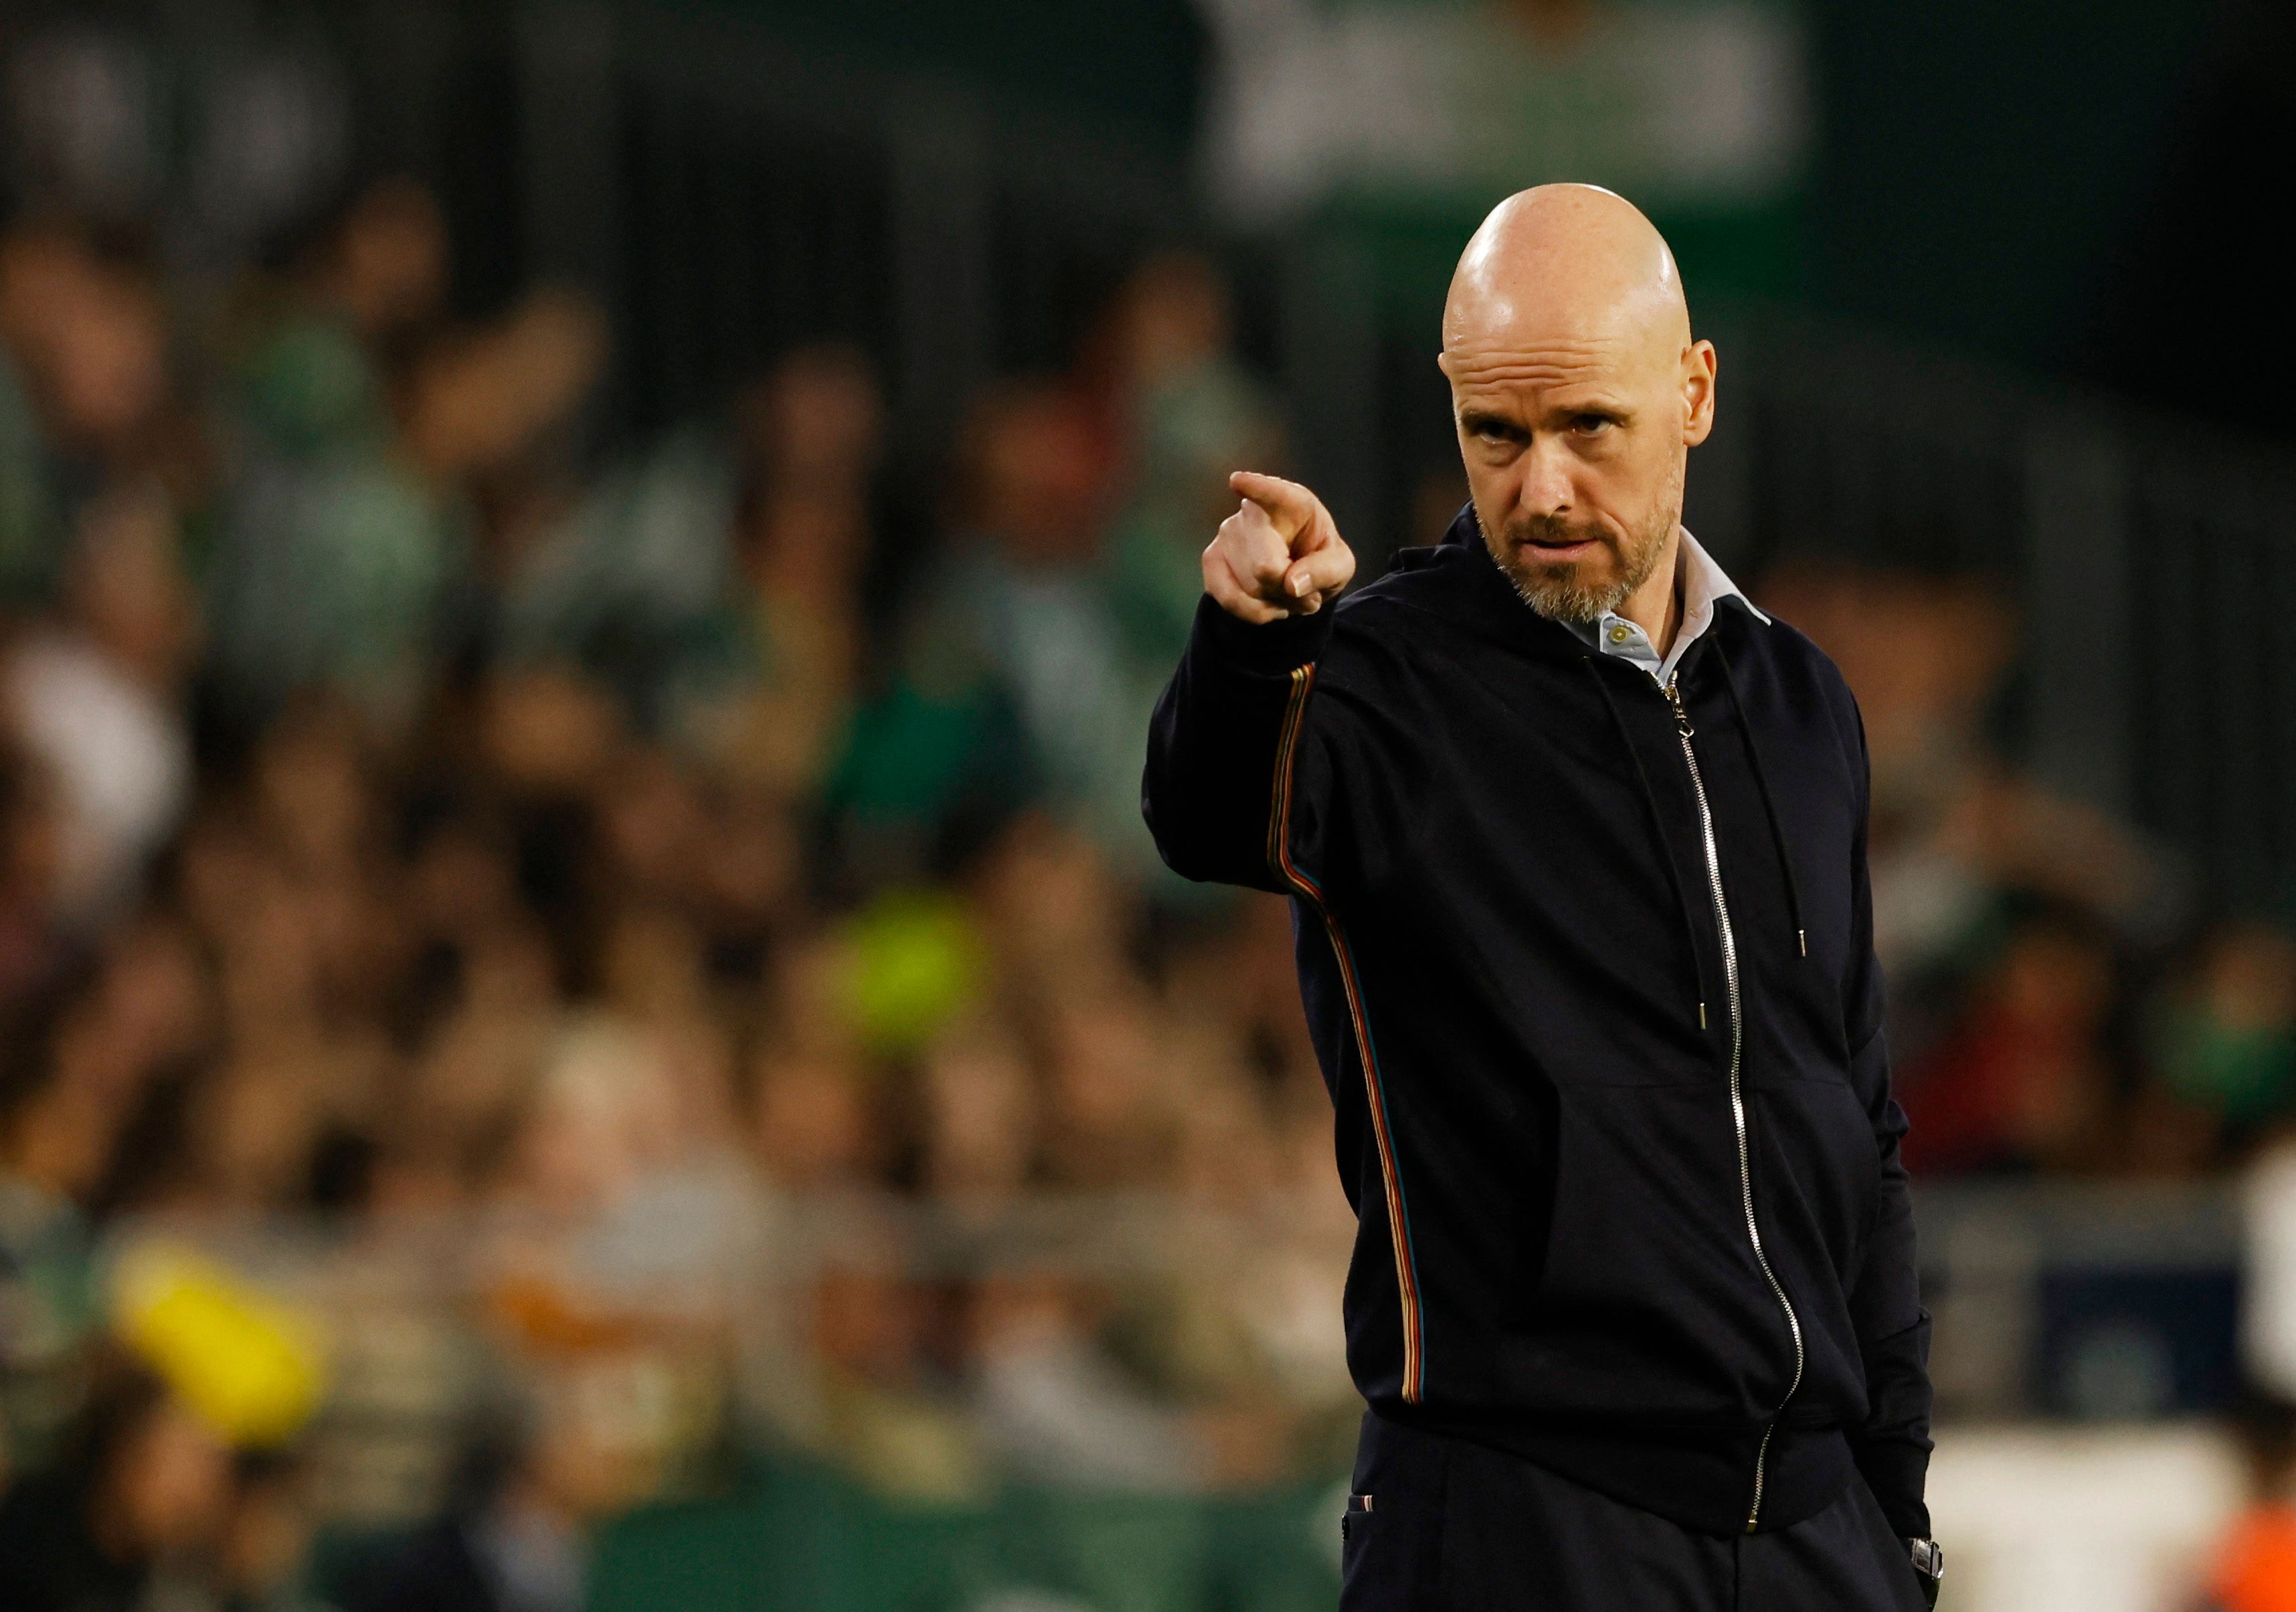 Manchester United manager Erik ten Hag pointing during game